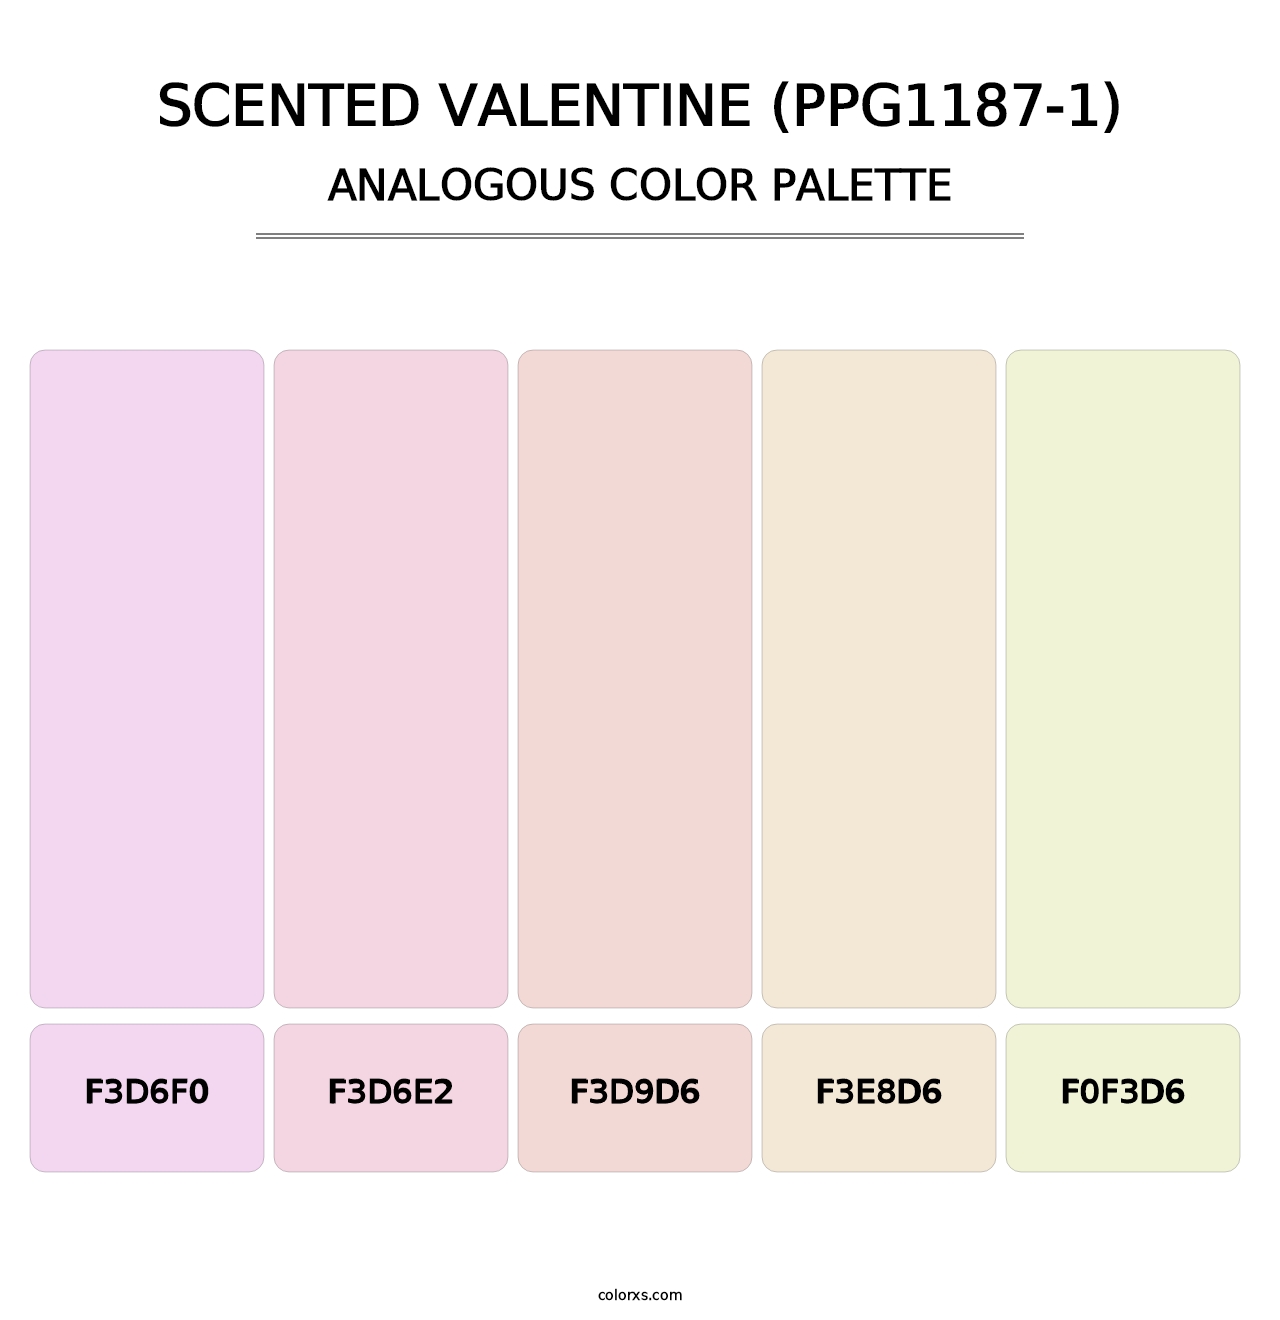 Scented Valentine (PPG1187-1) - Analogous Color Palette